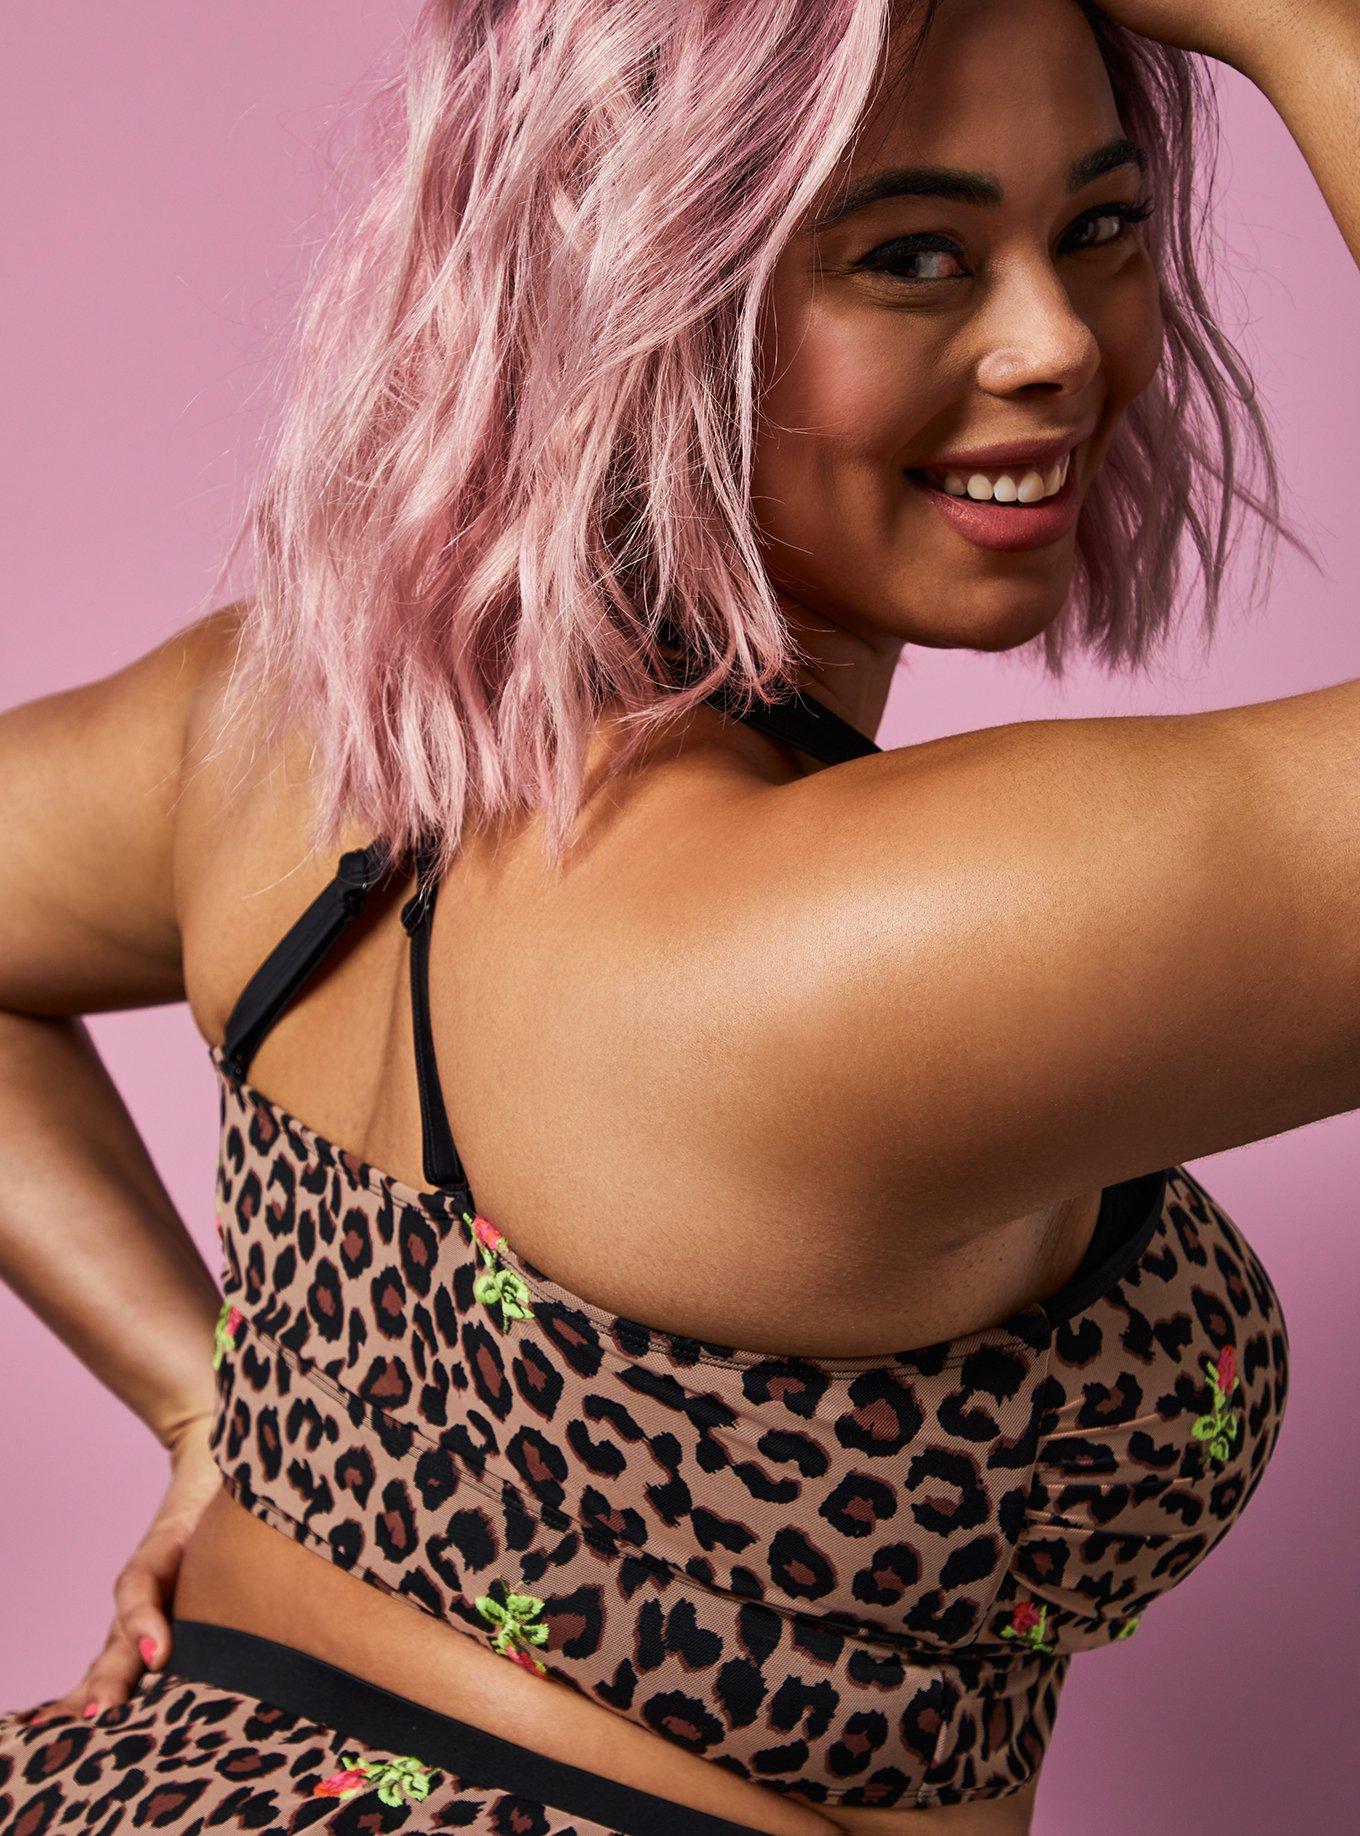 Betsey Johnson Partners With Torrid On A New 'Pretty & Punk' Plus-Size  Collection Out Today